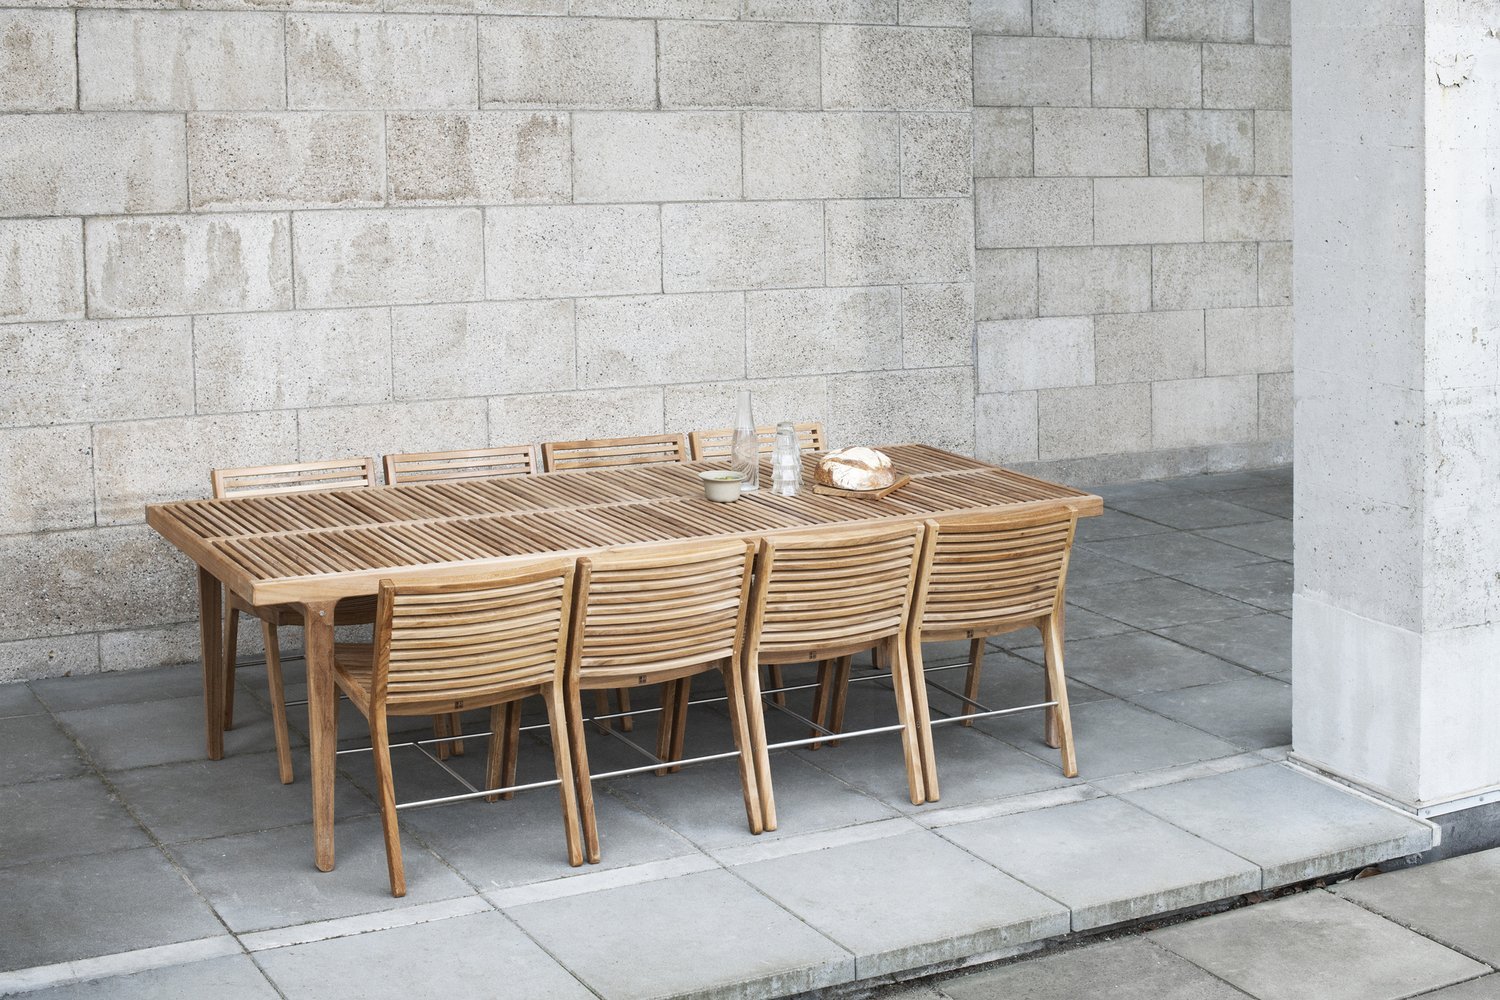 Sibast_RIB_outdoor_dining_chairs_and_dining_table_setting_2.jpeg